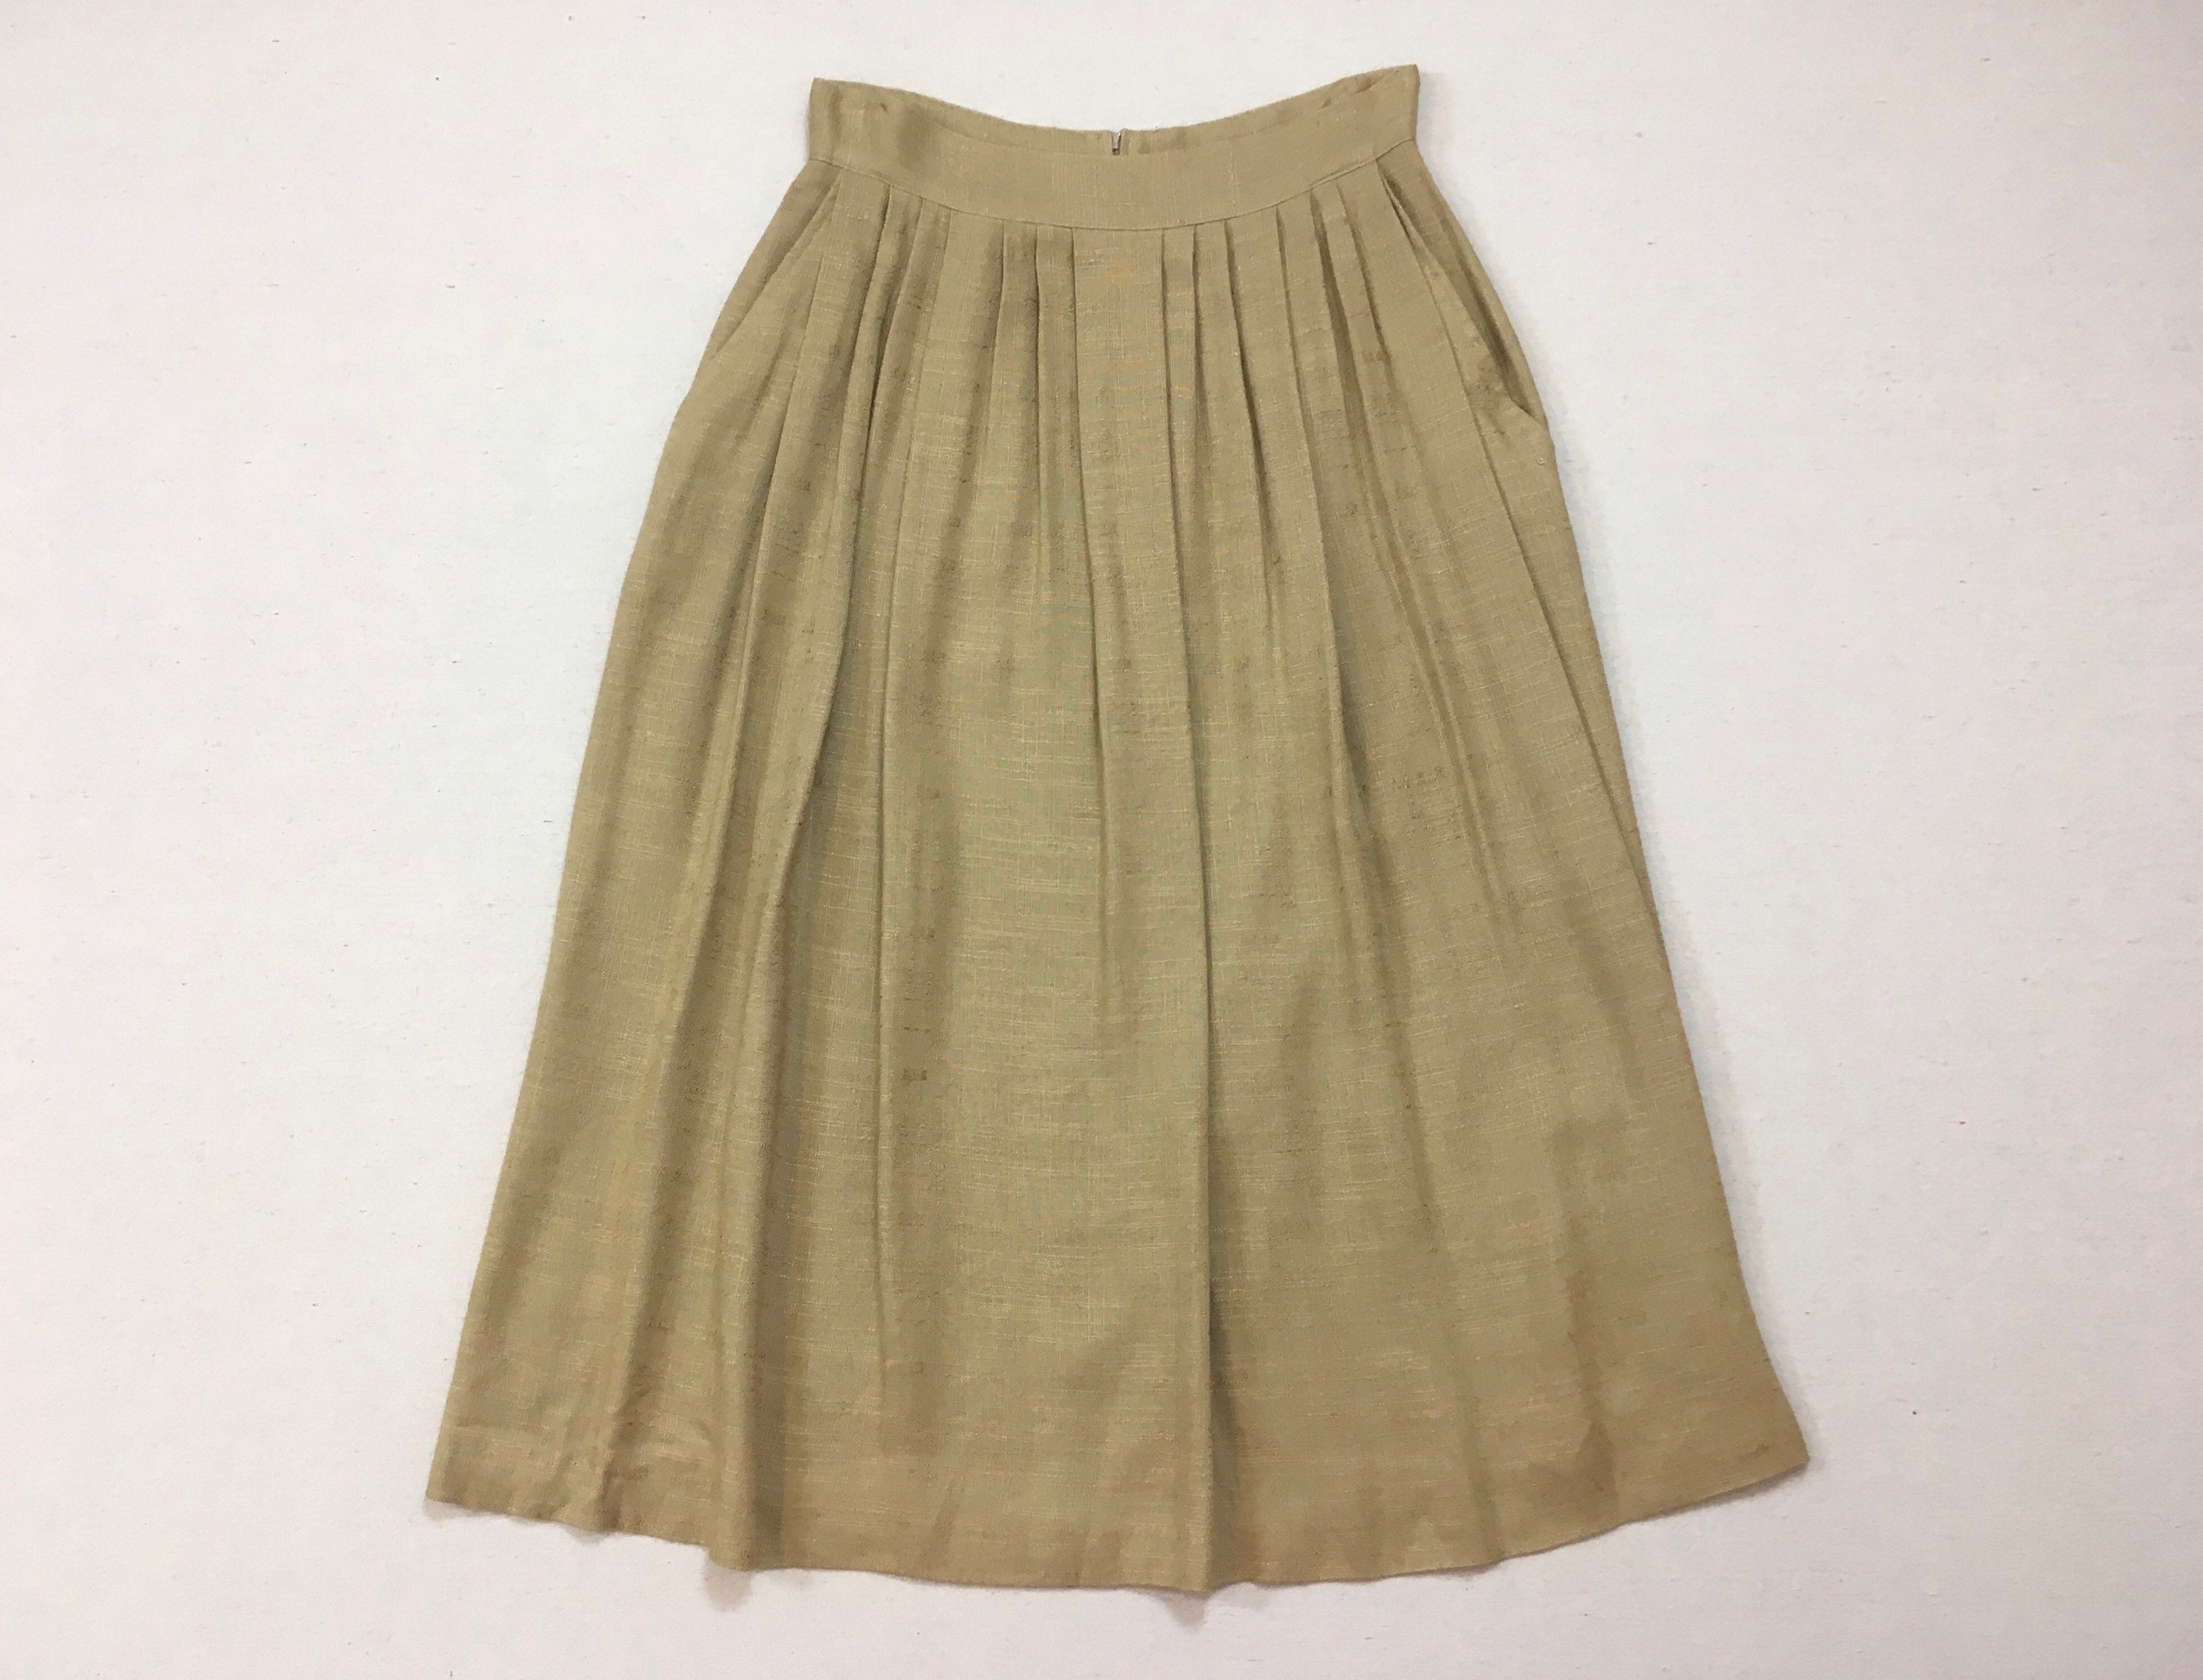 1980's, Woven, Rayon/Flax Blend, Pleated Skirt, in Beige